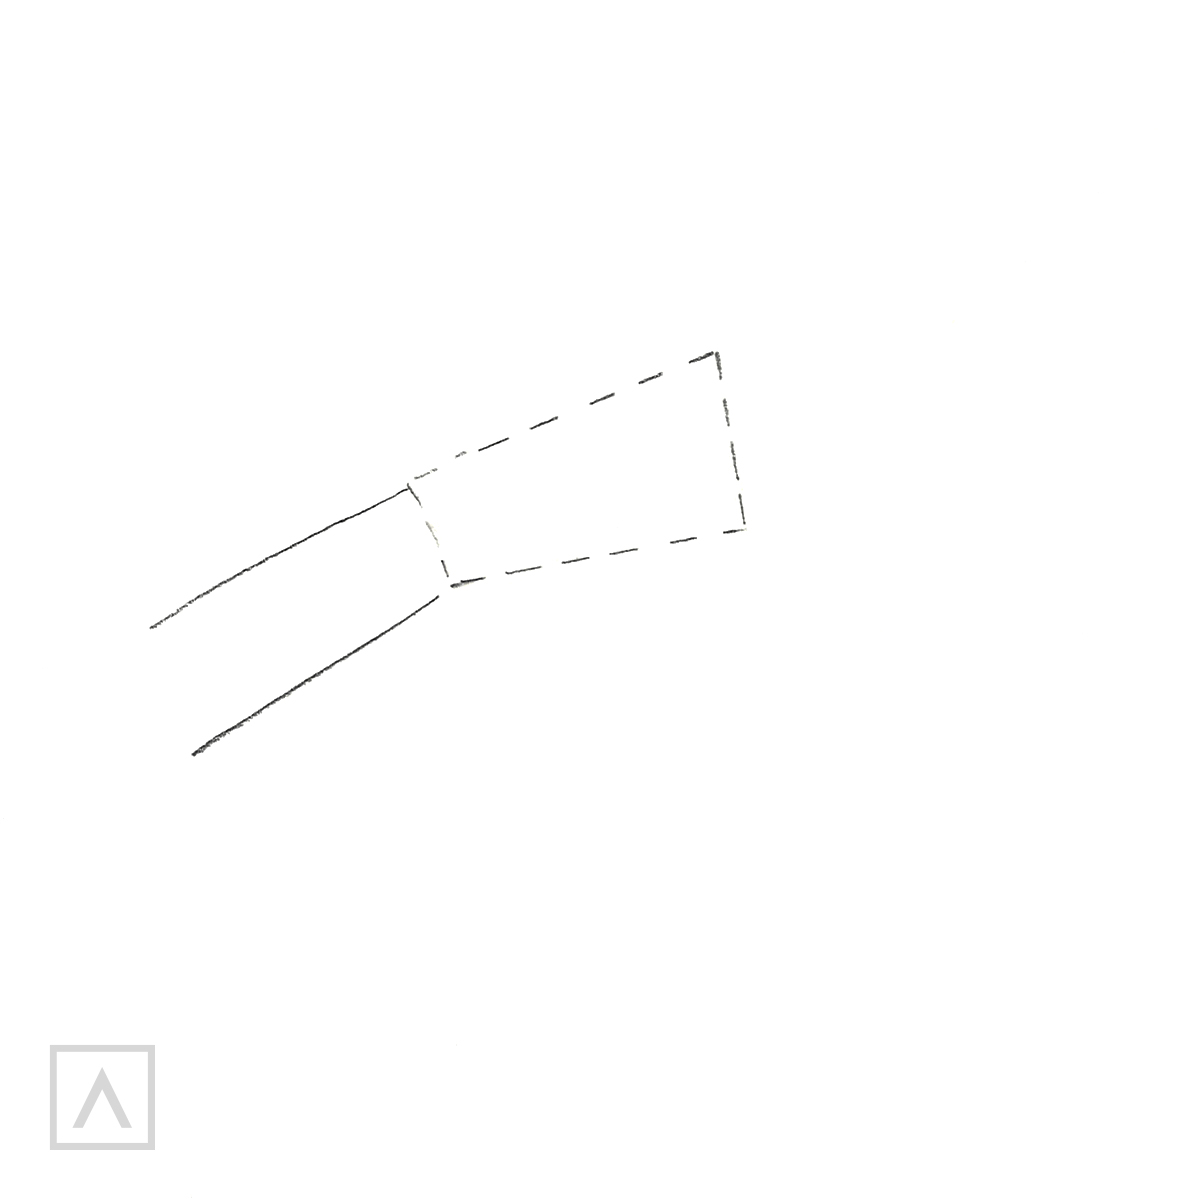 How to Draw a Hand - Step 1